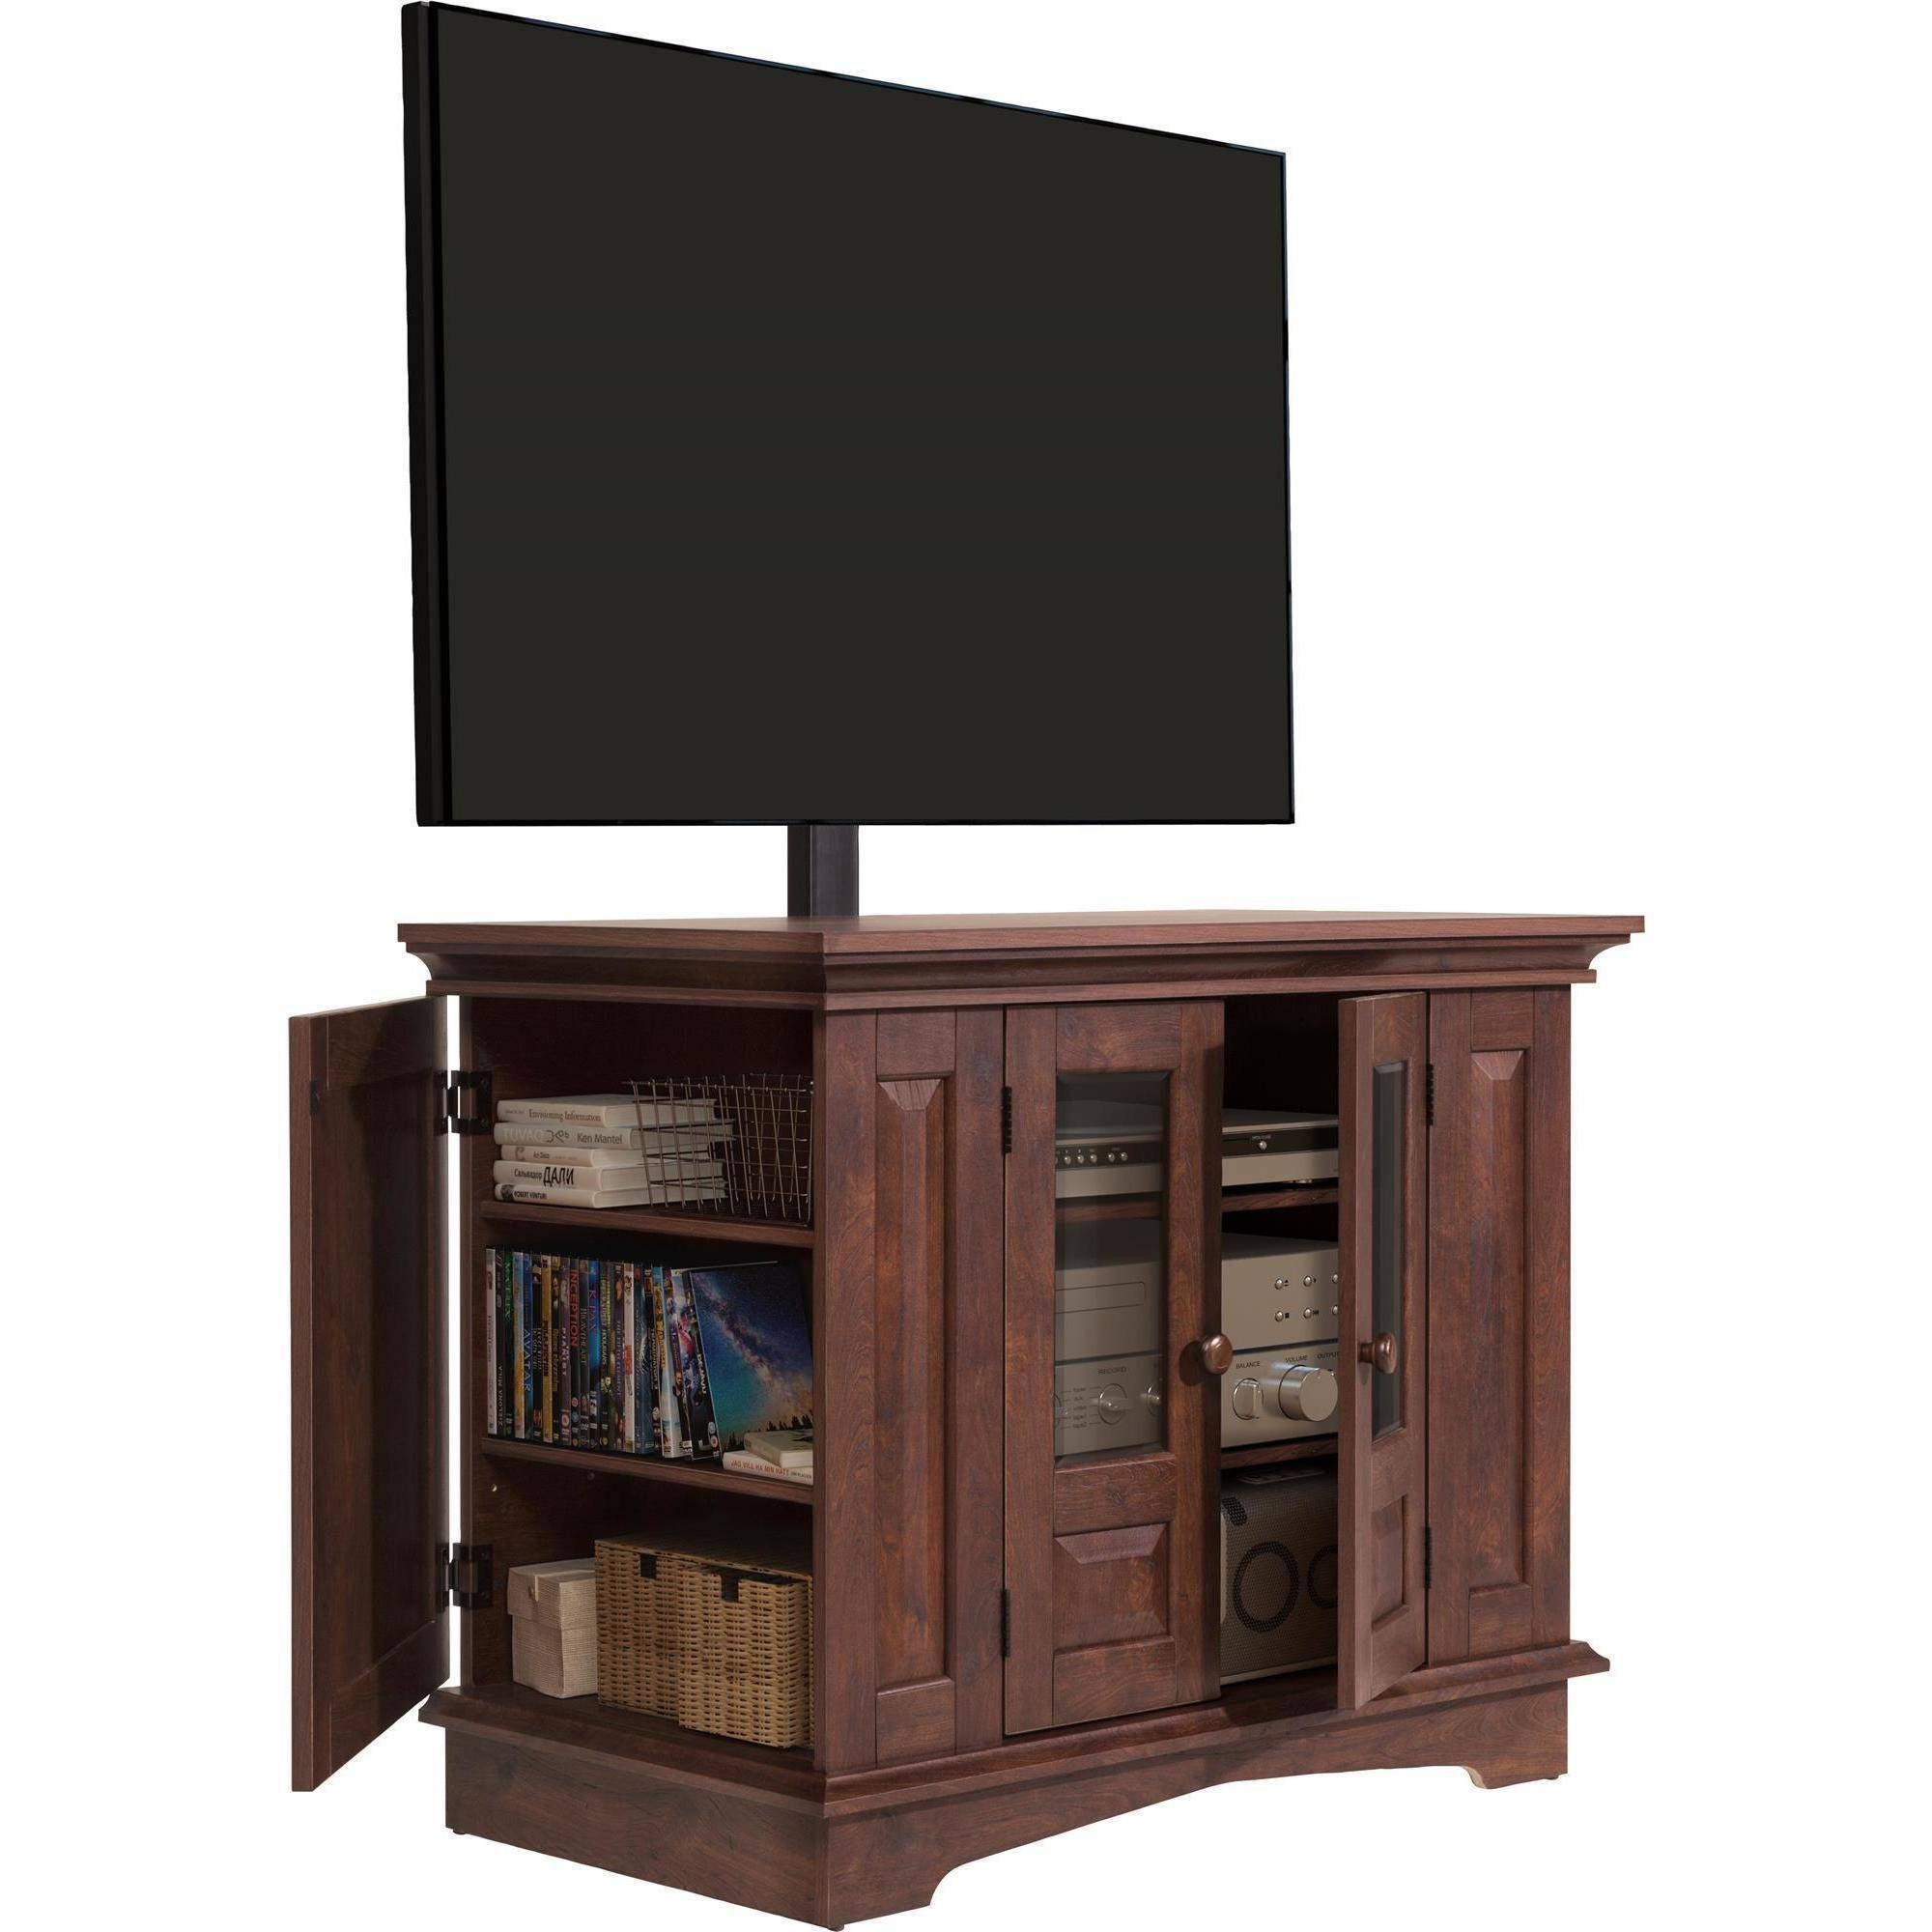 Willow Mountain Cherry Tv Stand With Mount, For Tvs Up To 37 For Tv Stand With Mount (View 9 of 15)